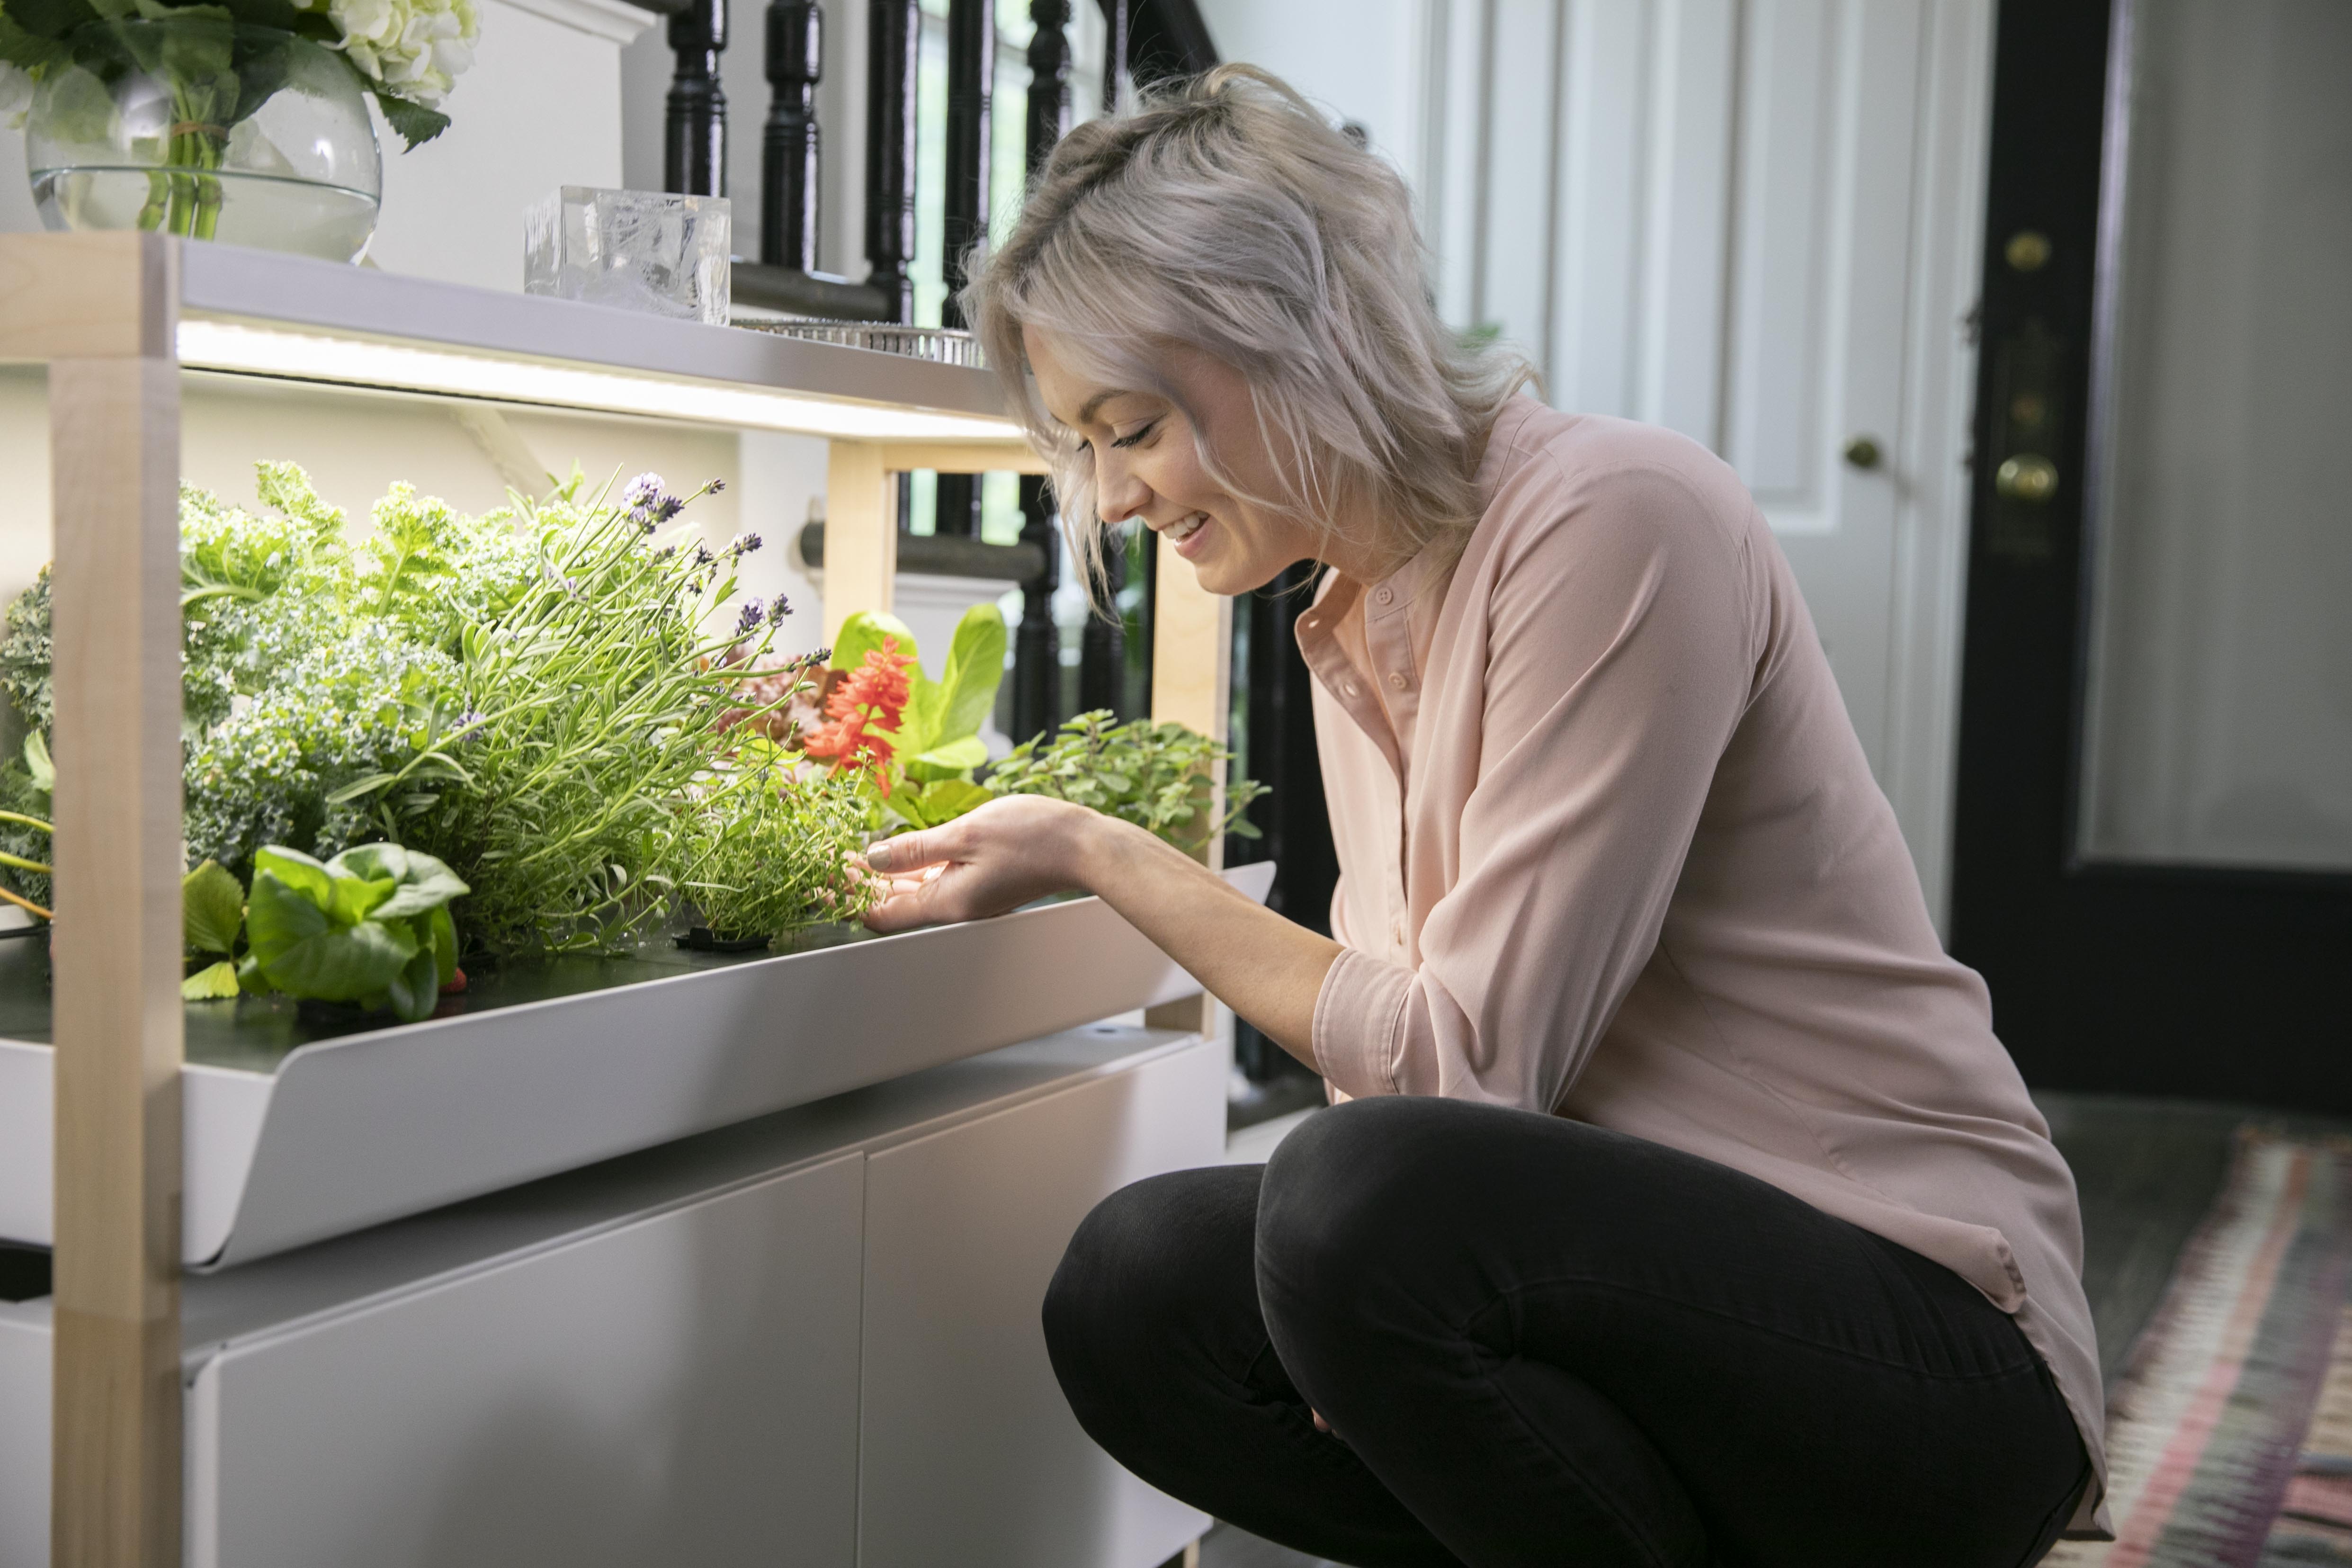 Indoor hydroponic gardens for growing produce and herbs